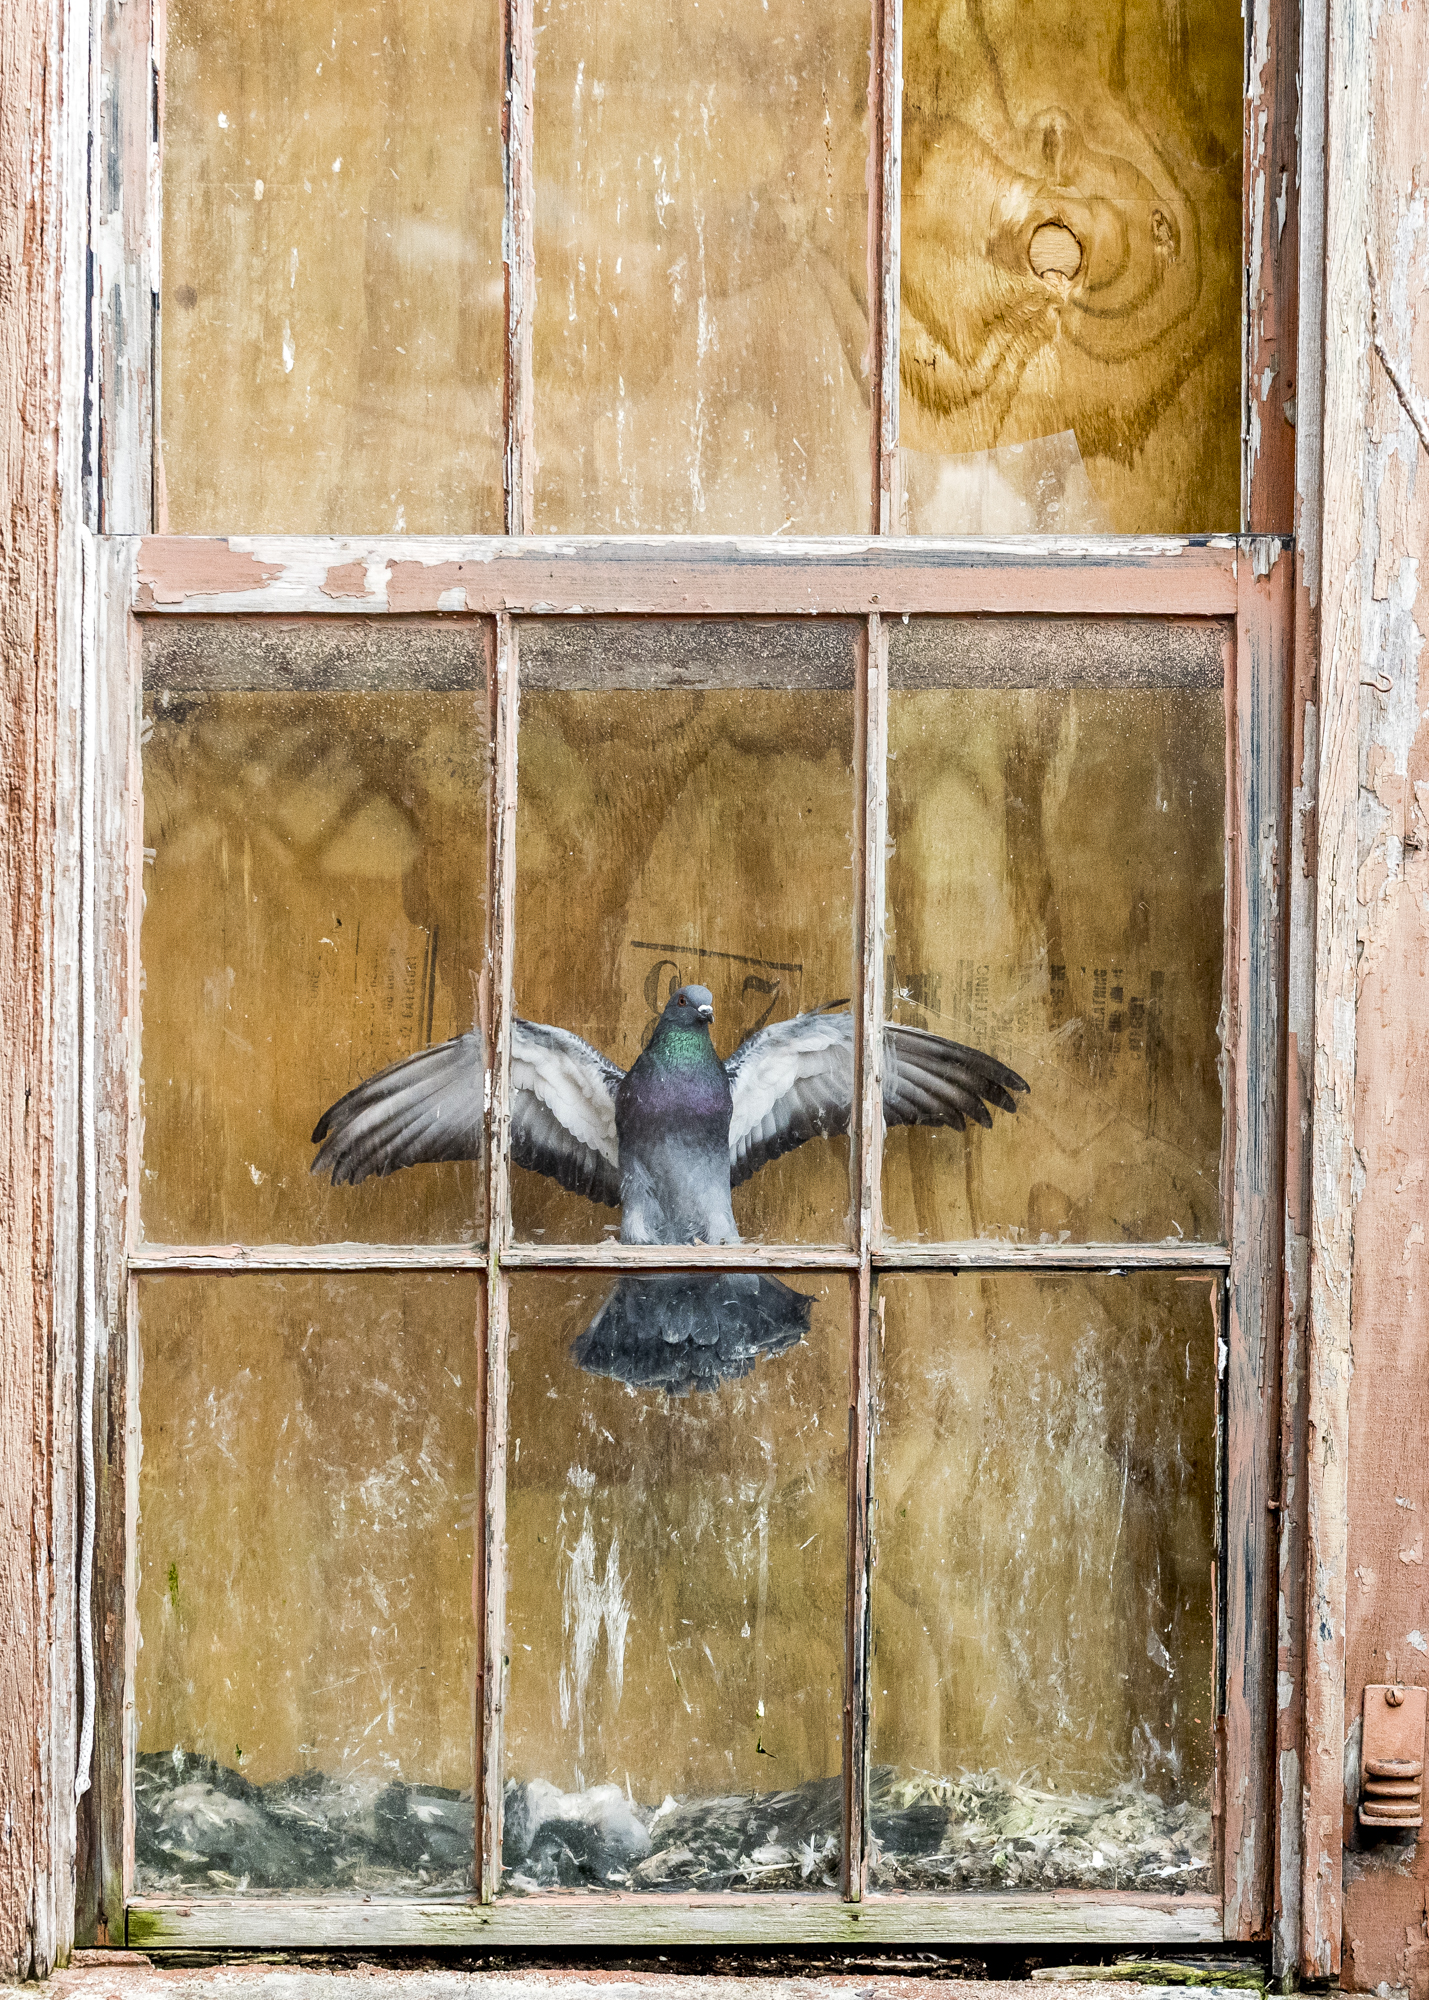  A pigeon remains trapped in a third story window in a cramped alleyway in Pomeroy, Ohio. It appears motionless as it frantically hovers above the corpses of other birds hoping to find the way out. 